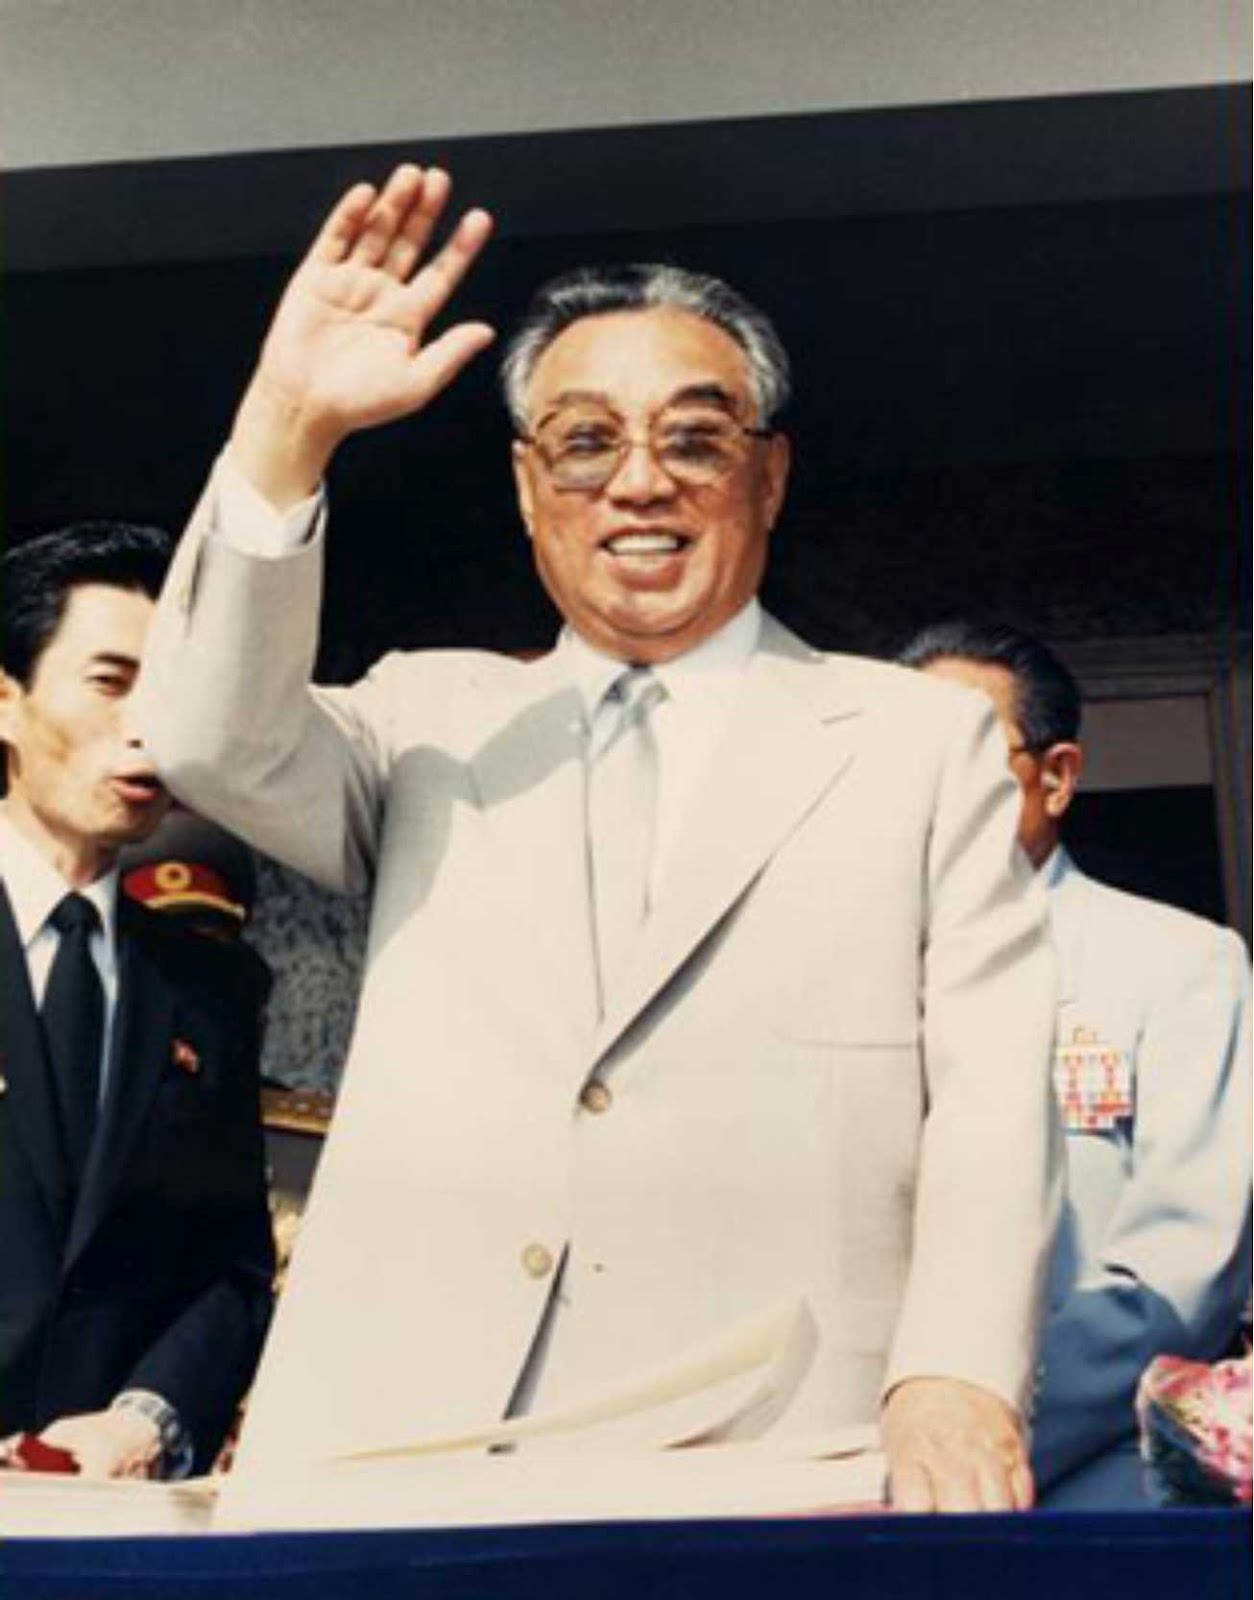 "The oppressed peoples can liberate themselves only through struggle. This is a simple and clear truth confirmed by history."Â <i>â€“Kim Il-sung (1912-1994, Supreme Leader of North Korea, killed more than 1 million of his own citizens)</i>